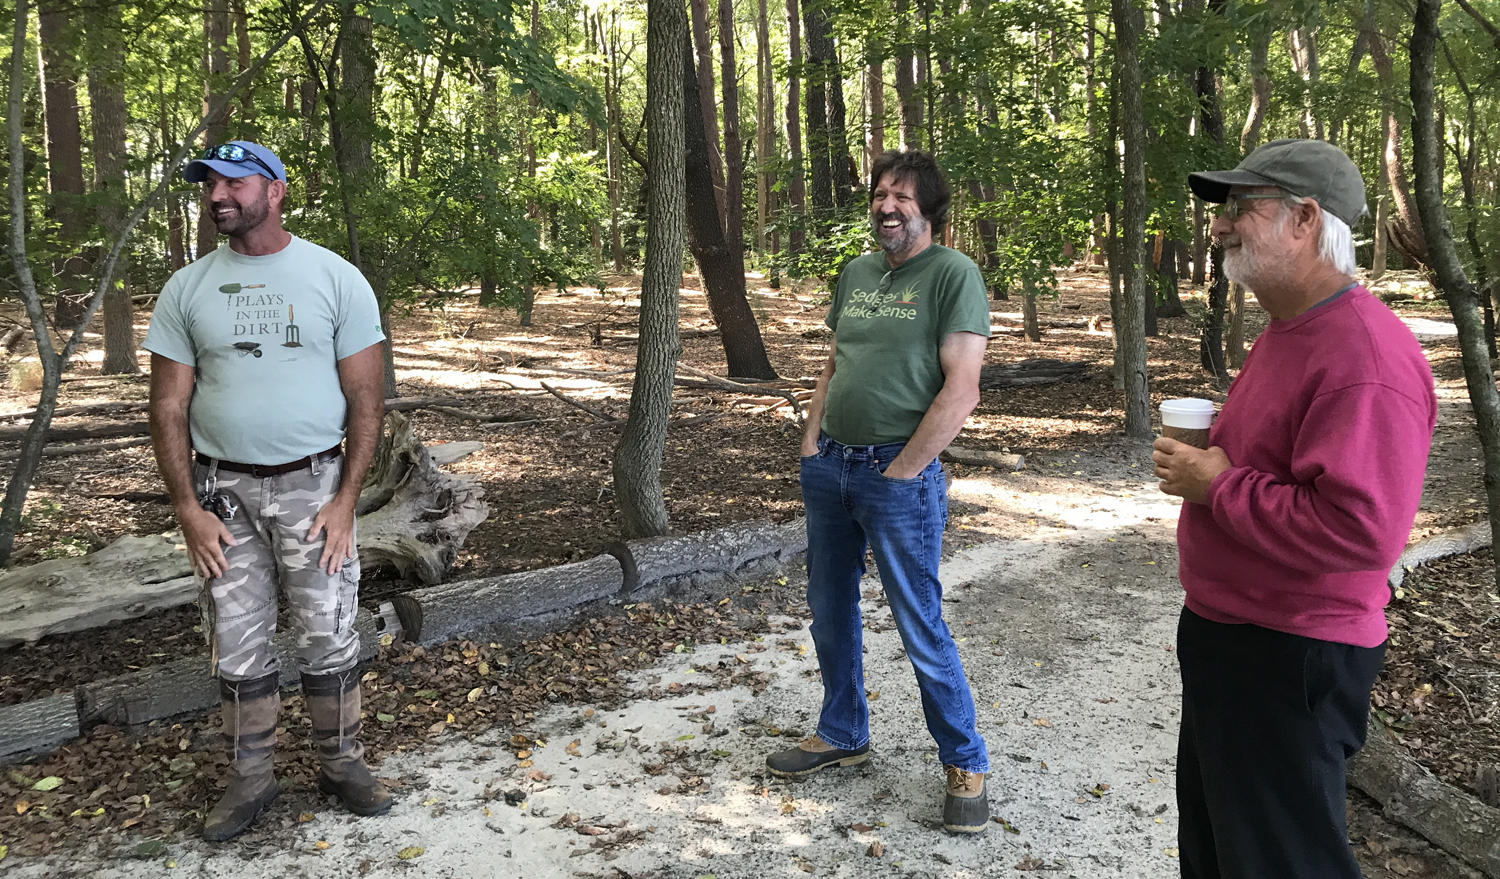 John Hoffman, Roy Diblik (R) and others took a tour of the nearby DBG woodlands with Gregg Tepper (L).